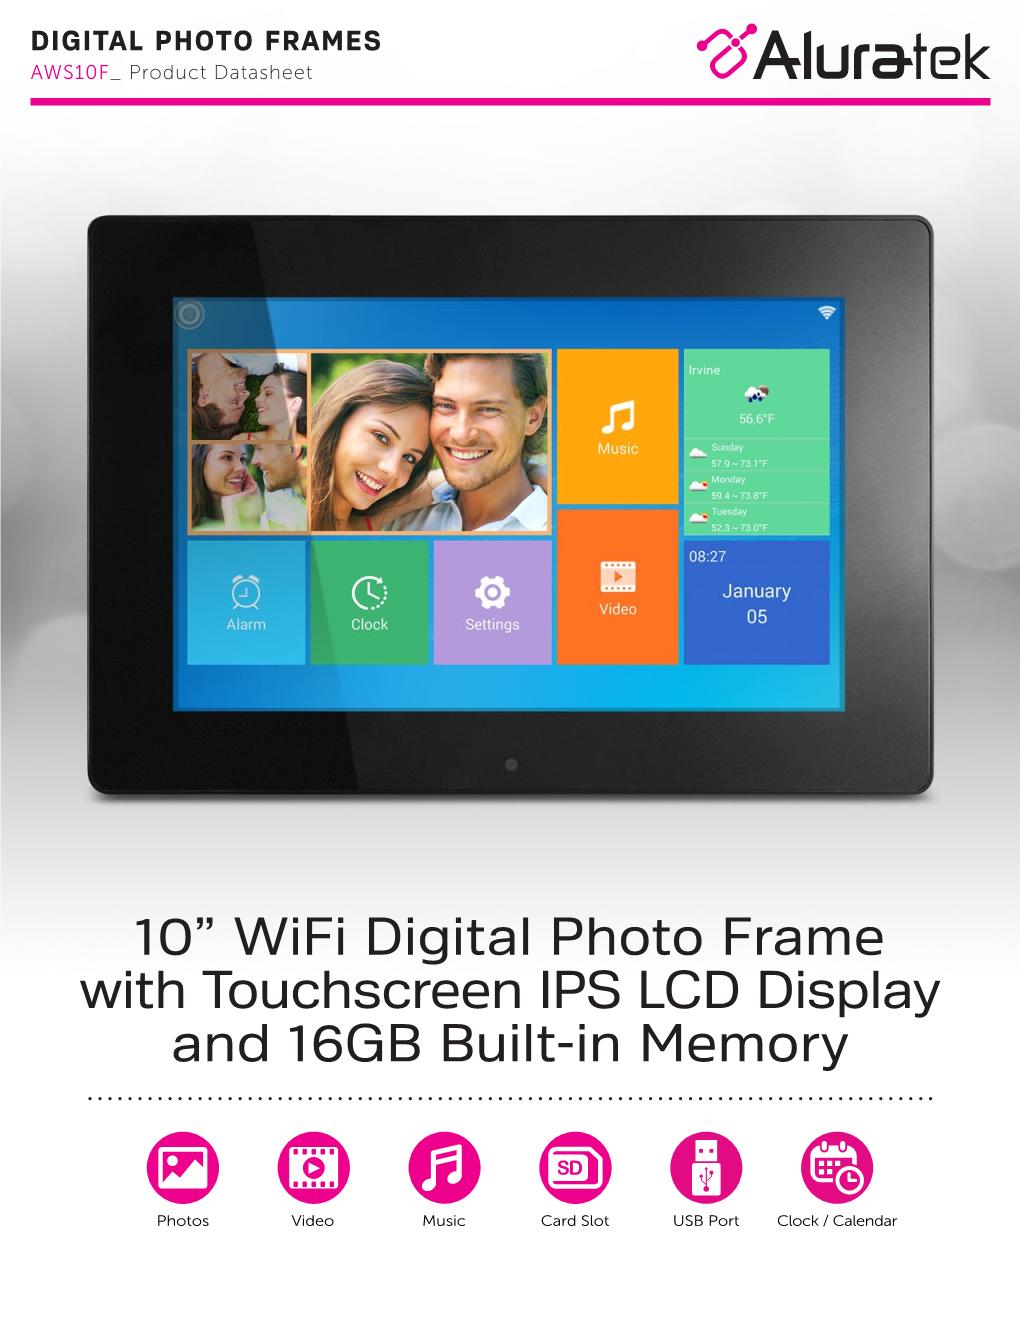 10” Wifi Digital Photo Frame with Touchscreen IPS LCD Display and 16GB Built-In Memory